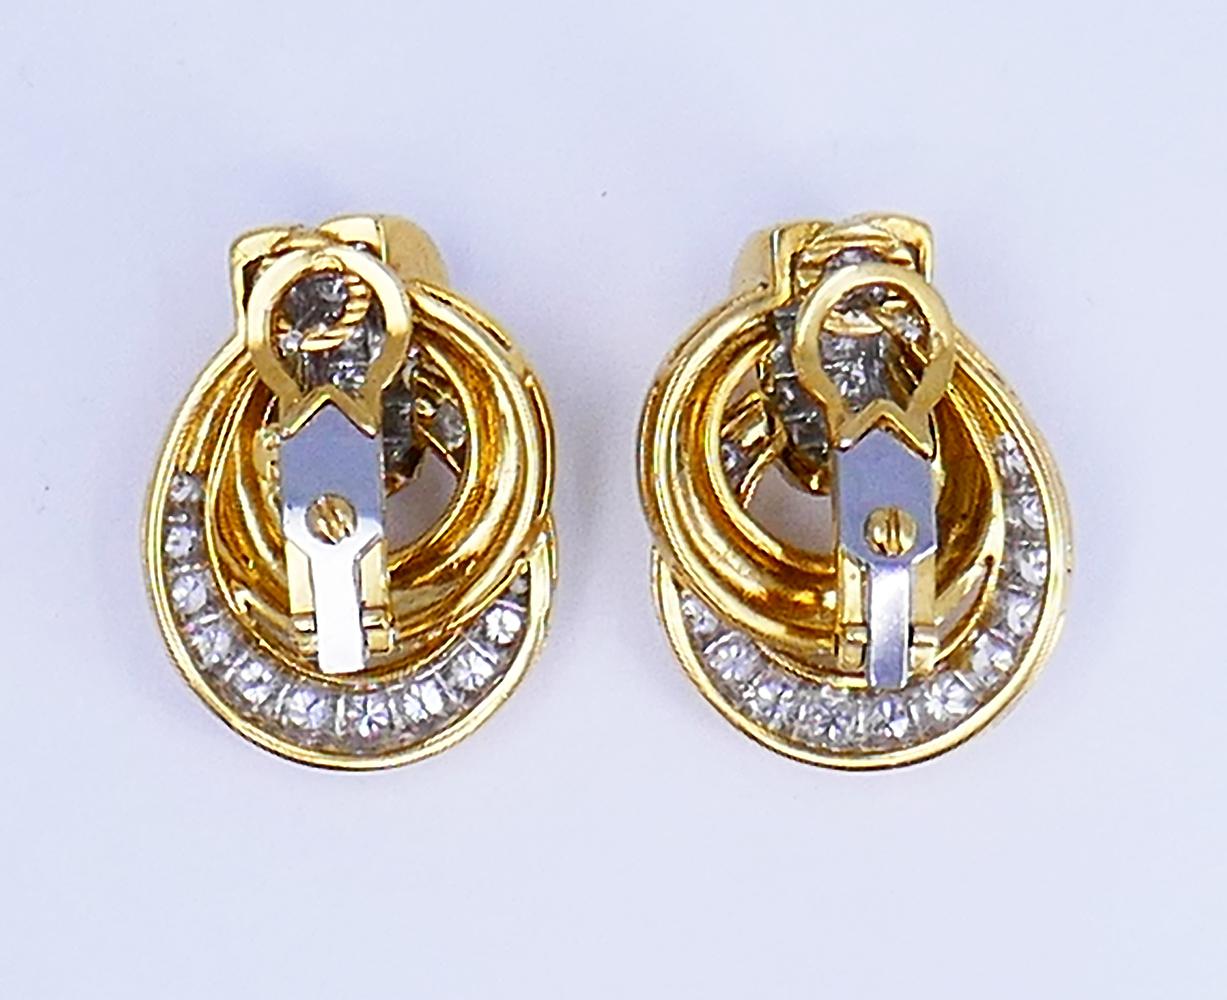 Round Cut Vintage Earrings 18k Gold Diamond French Estate Jewelry